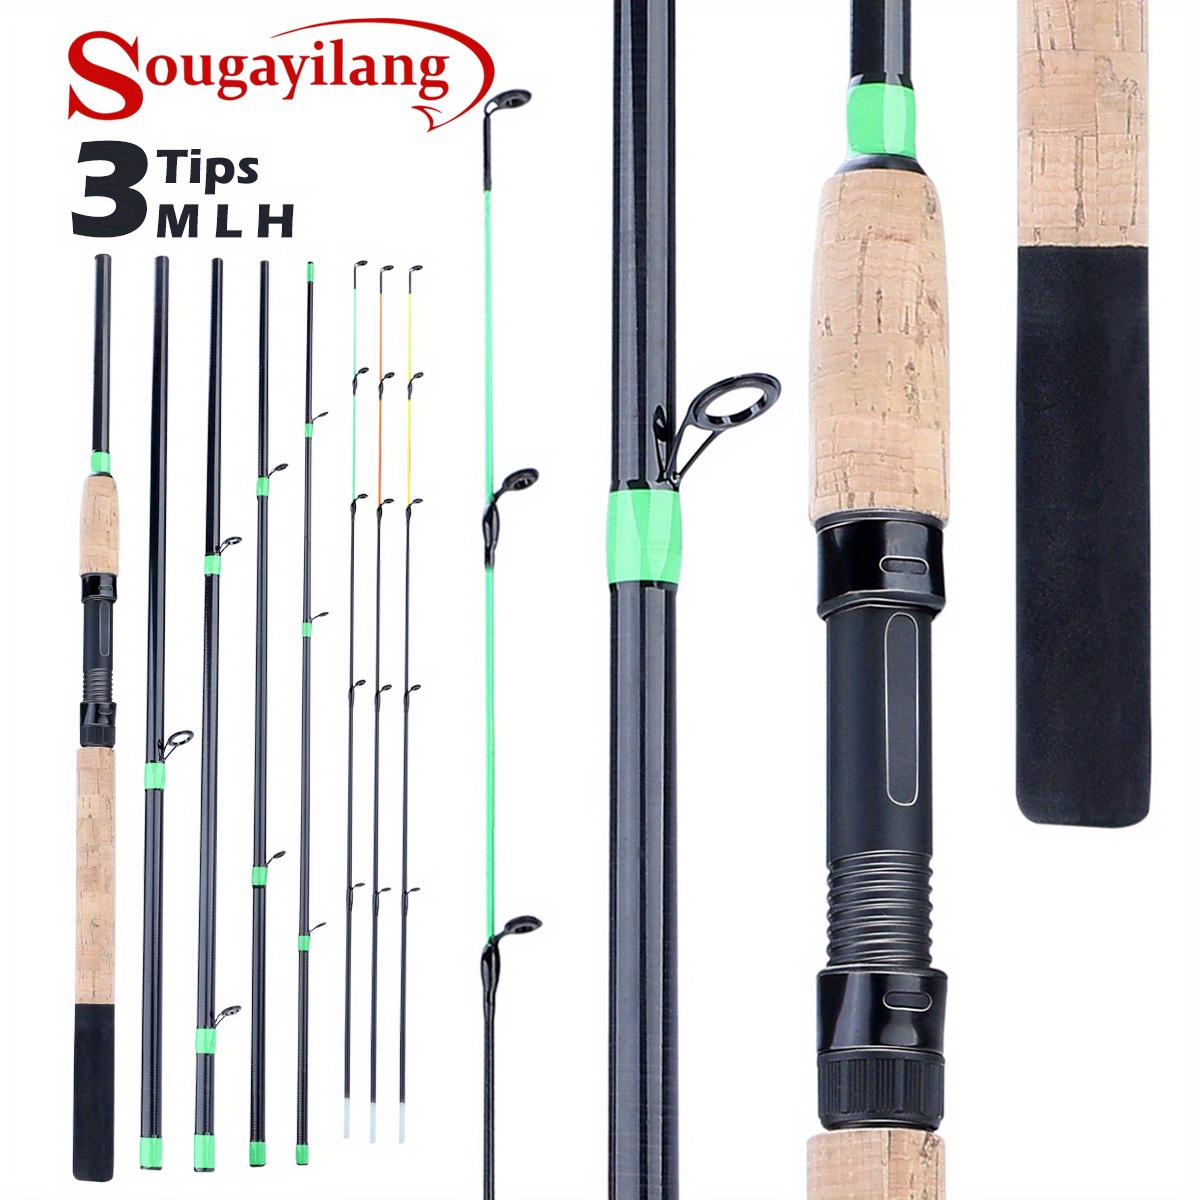 Sougayilang 1pc Portable 6 Sections Carbon Fiber Flying Fishing Rod */9.8ft  Lightweight Fishing Rod With Cork Handle, Fishing Tackle